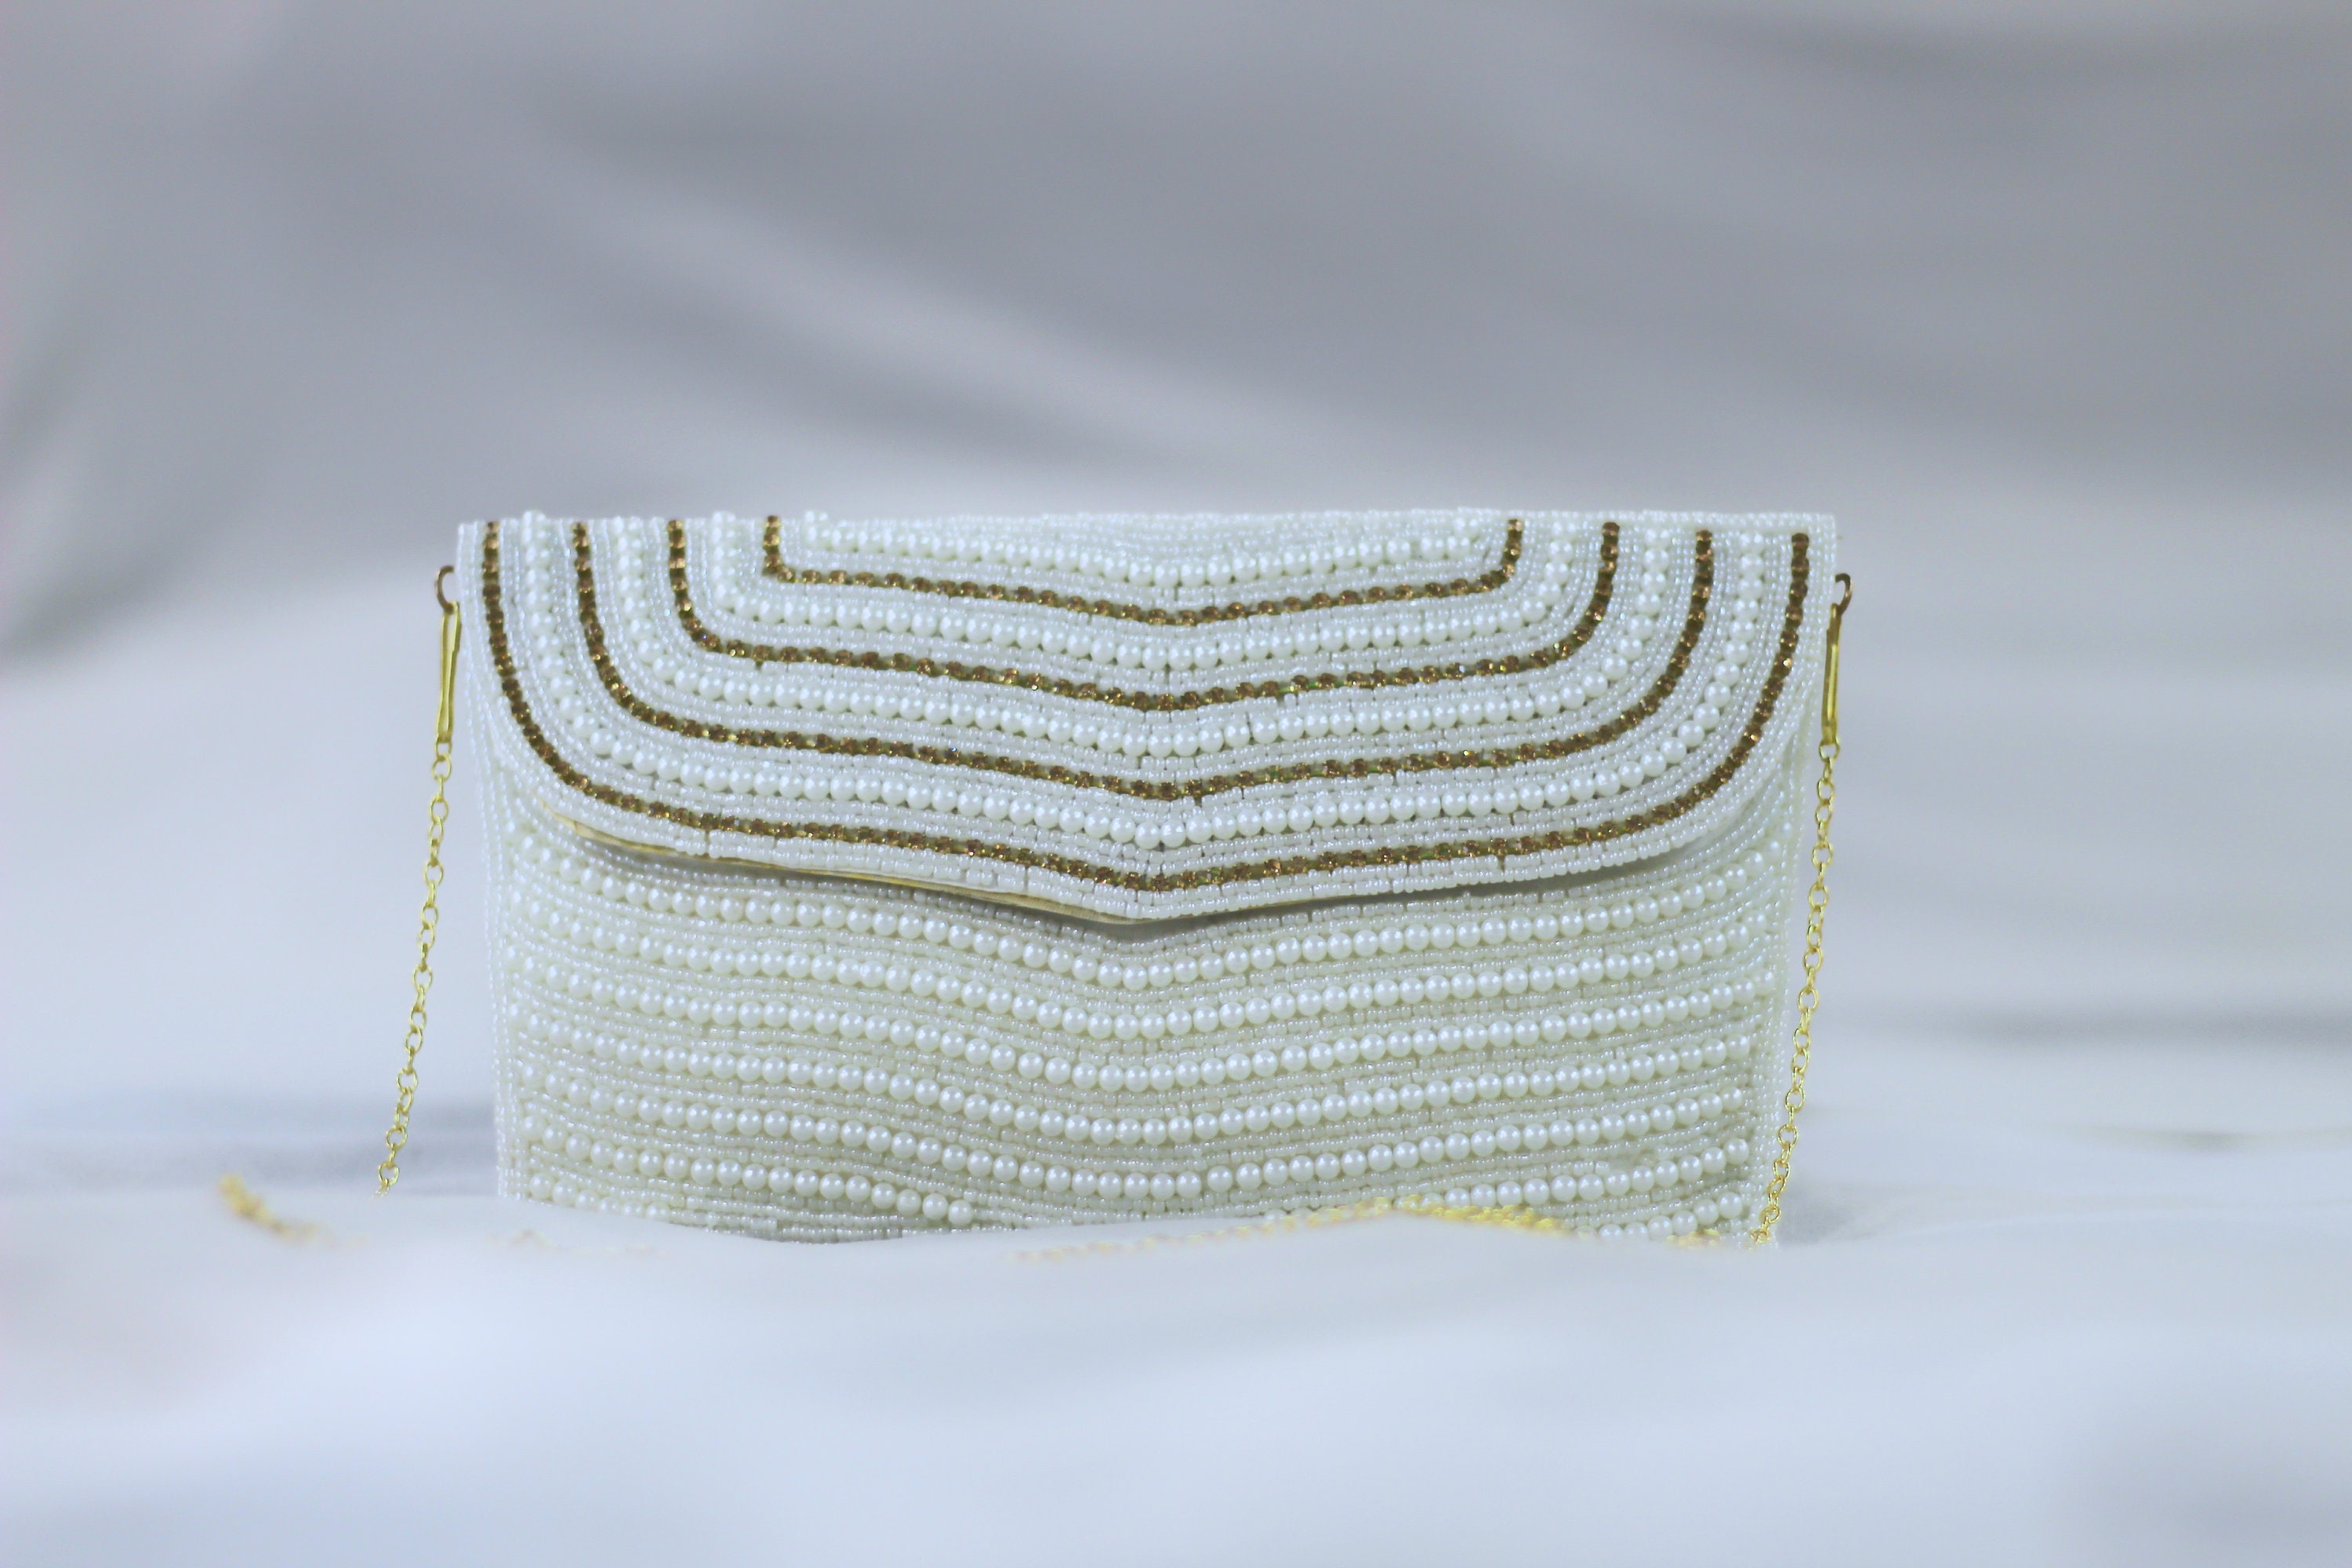 Beaded Clutch Purses Manufacturer Supplier from Jaipur India